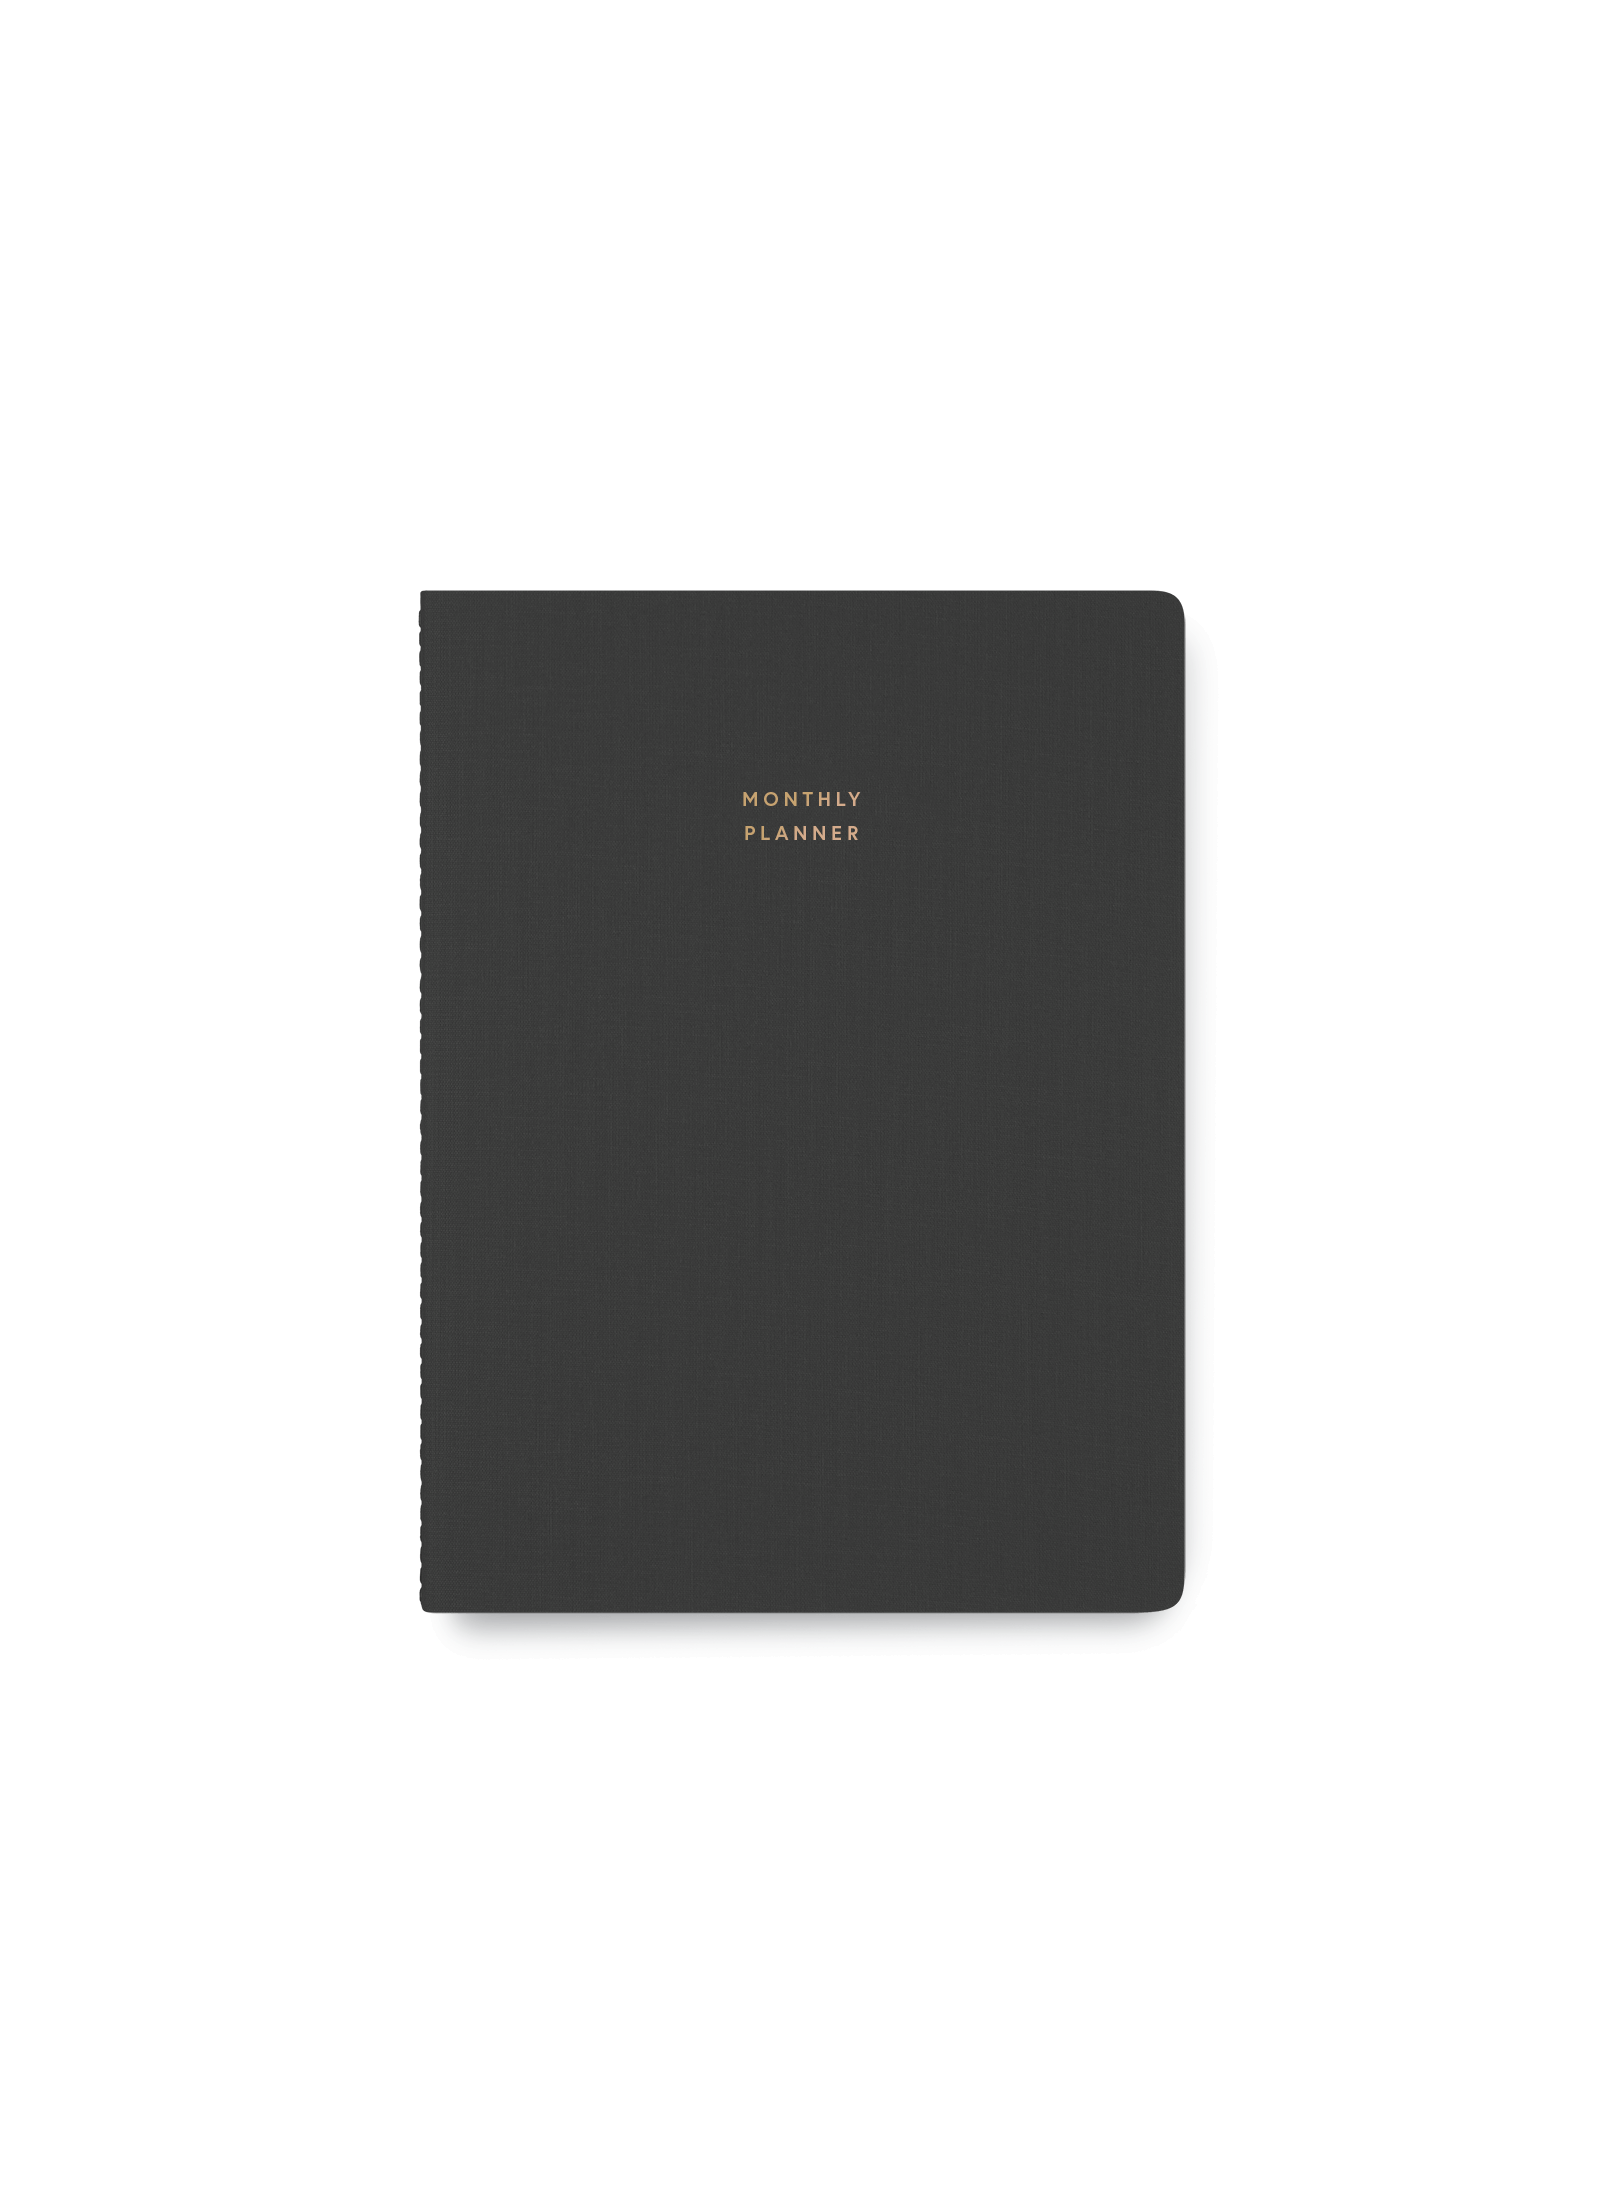 Appointed undated Monthly Planner in Charcoal Gray bookcloth with smyth-sewn binding front view || Charcoal Gray